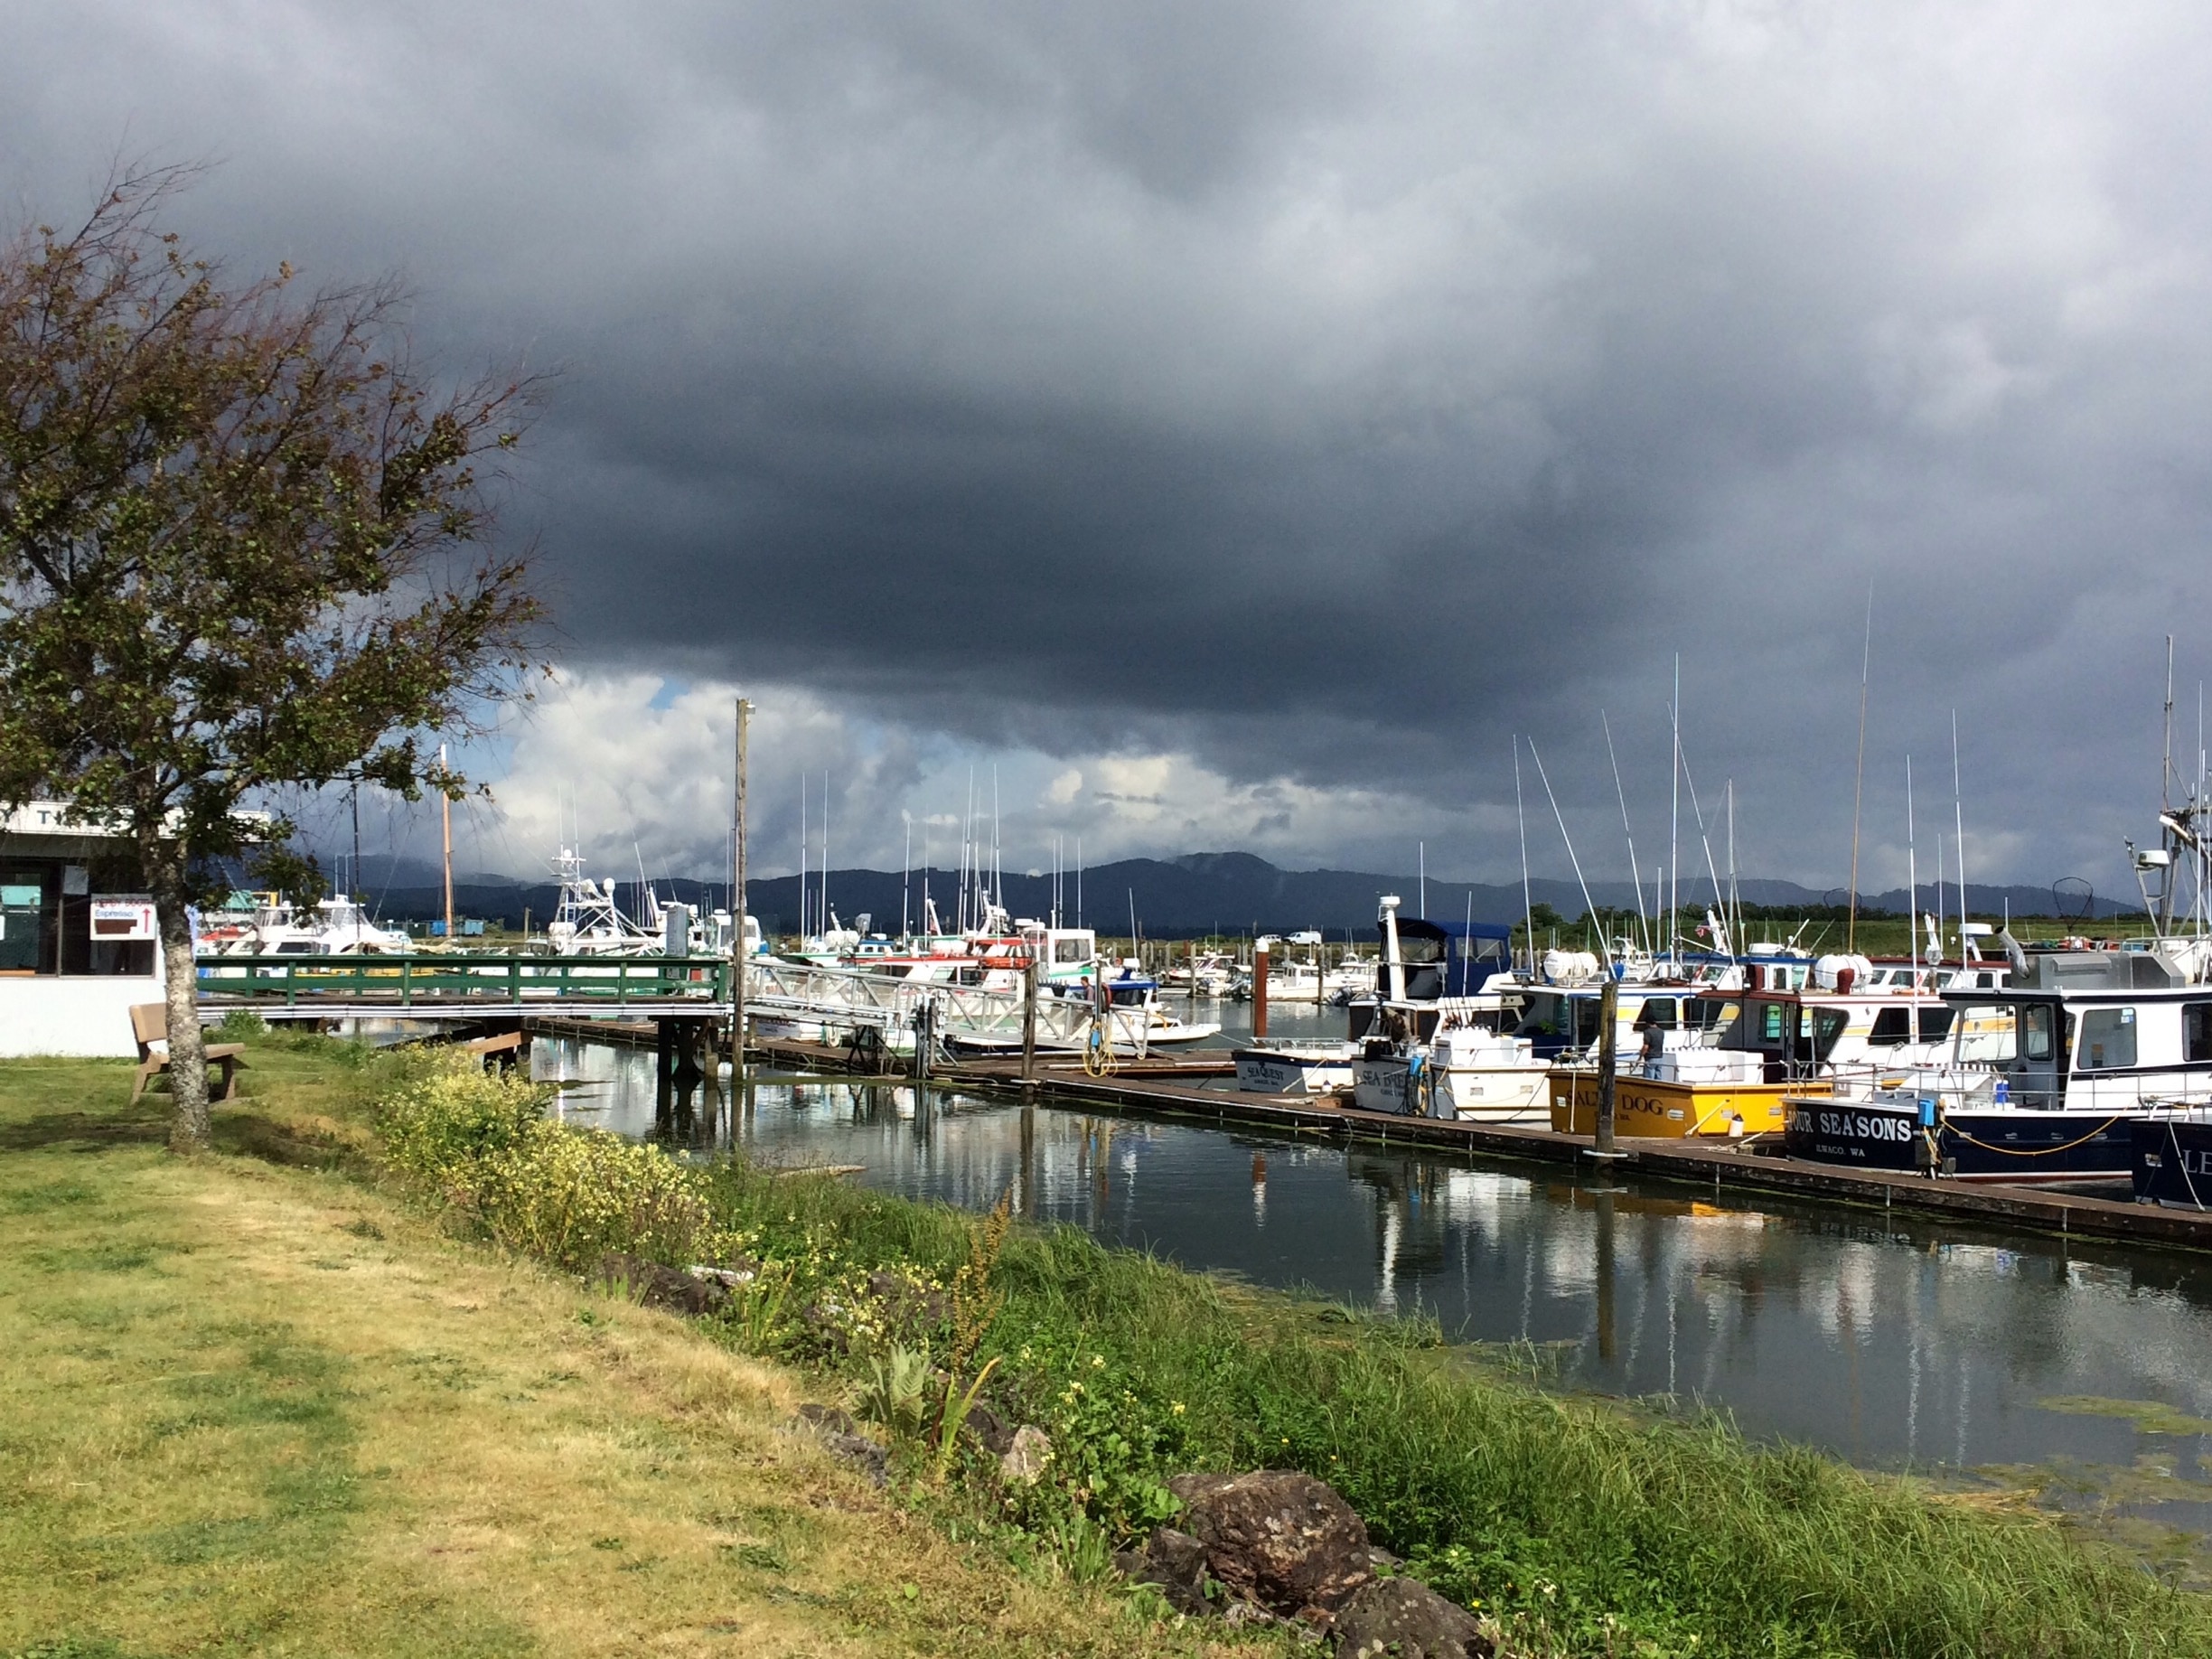 Only 20 minutes from Astoria OR and 10 minutes from Long Beach.  Enjoy the Saturday market along the waterfront, go fishing, or start here on your 8 mile walk or bike ride of the Discovery Trail. Don't let the gray clouds concern you, this is not uncommon. 